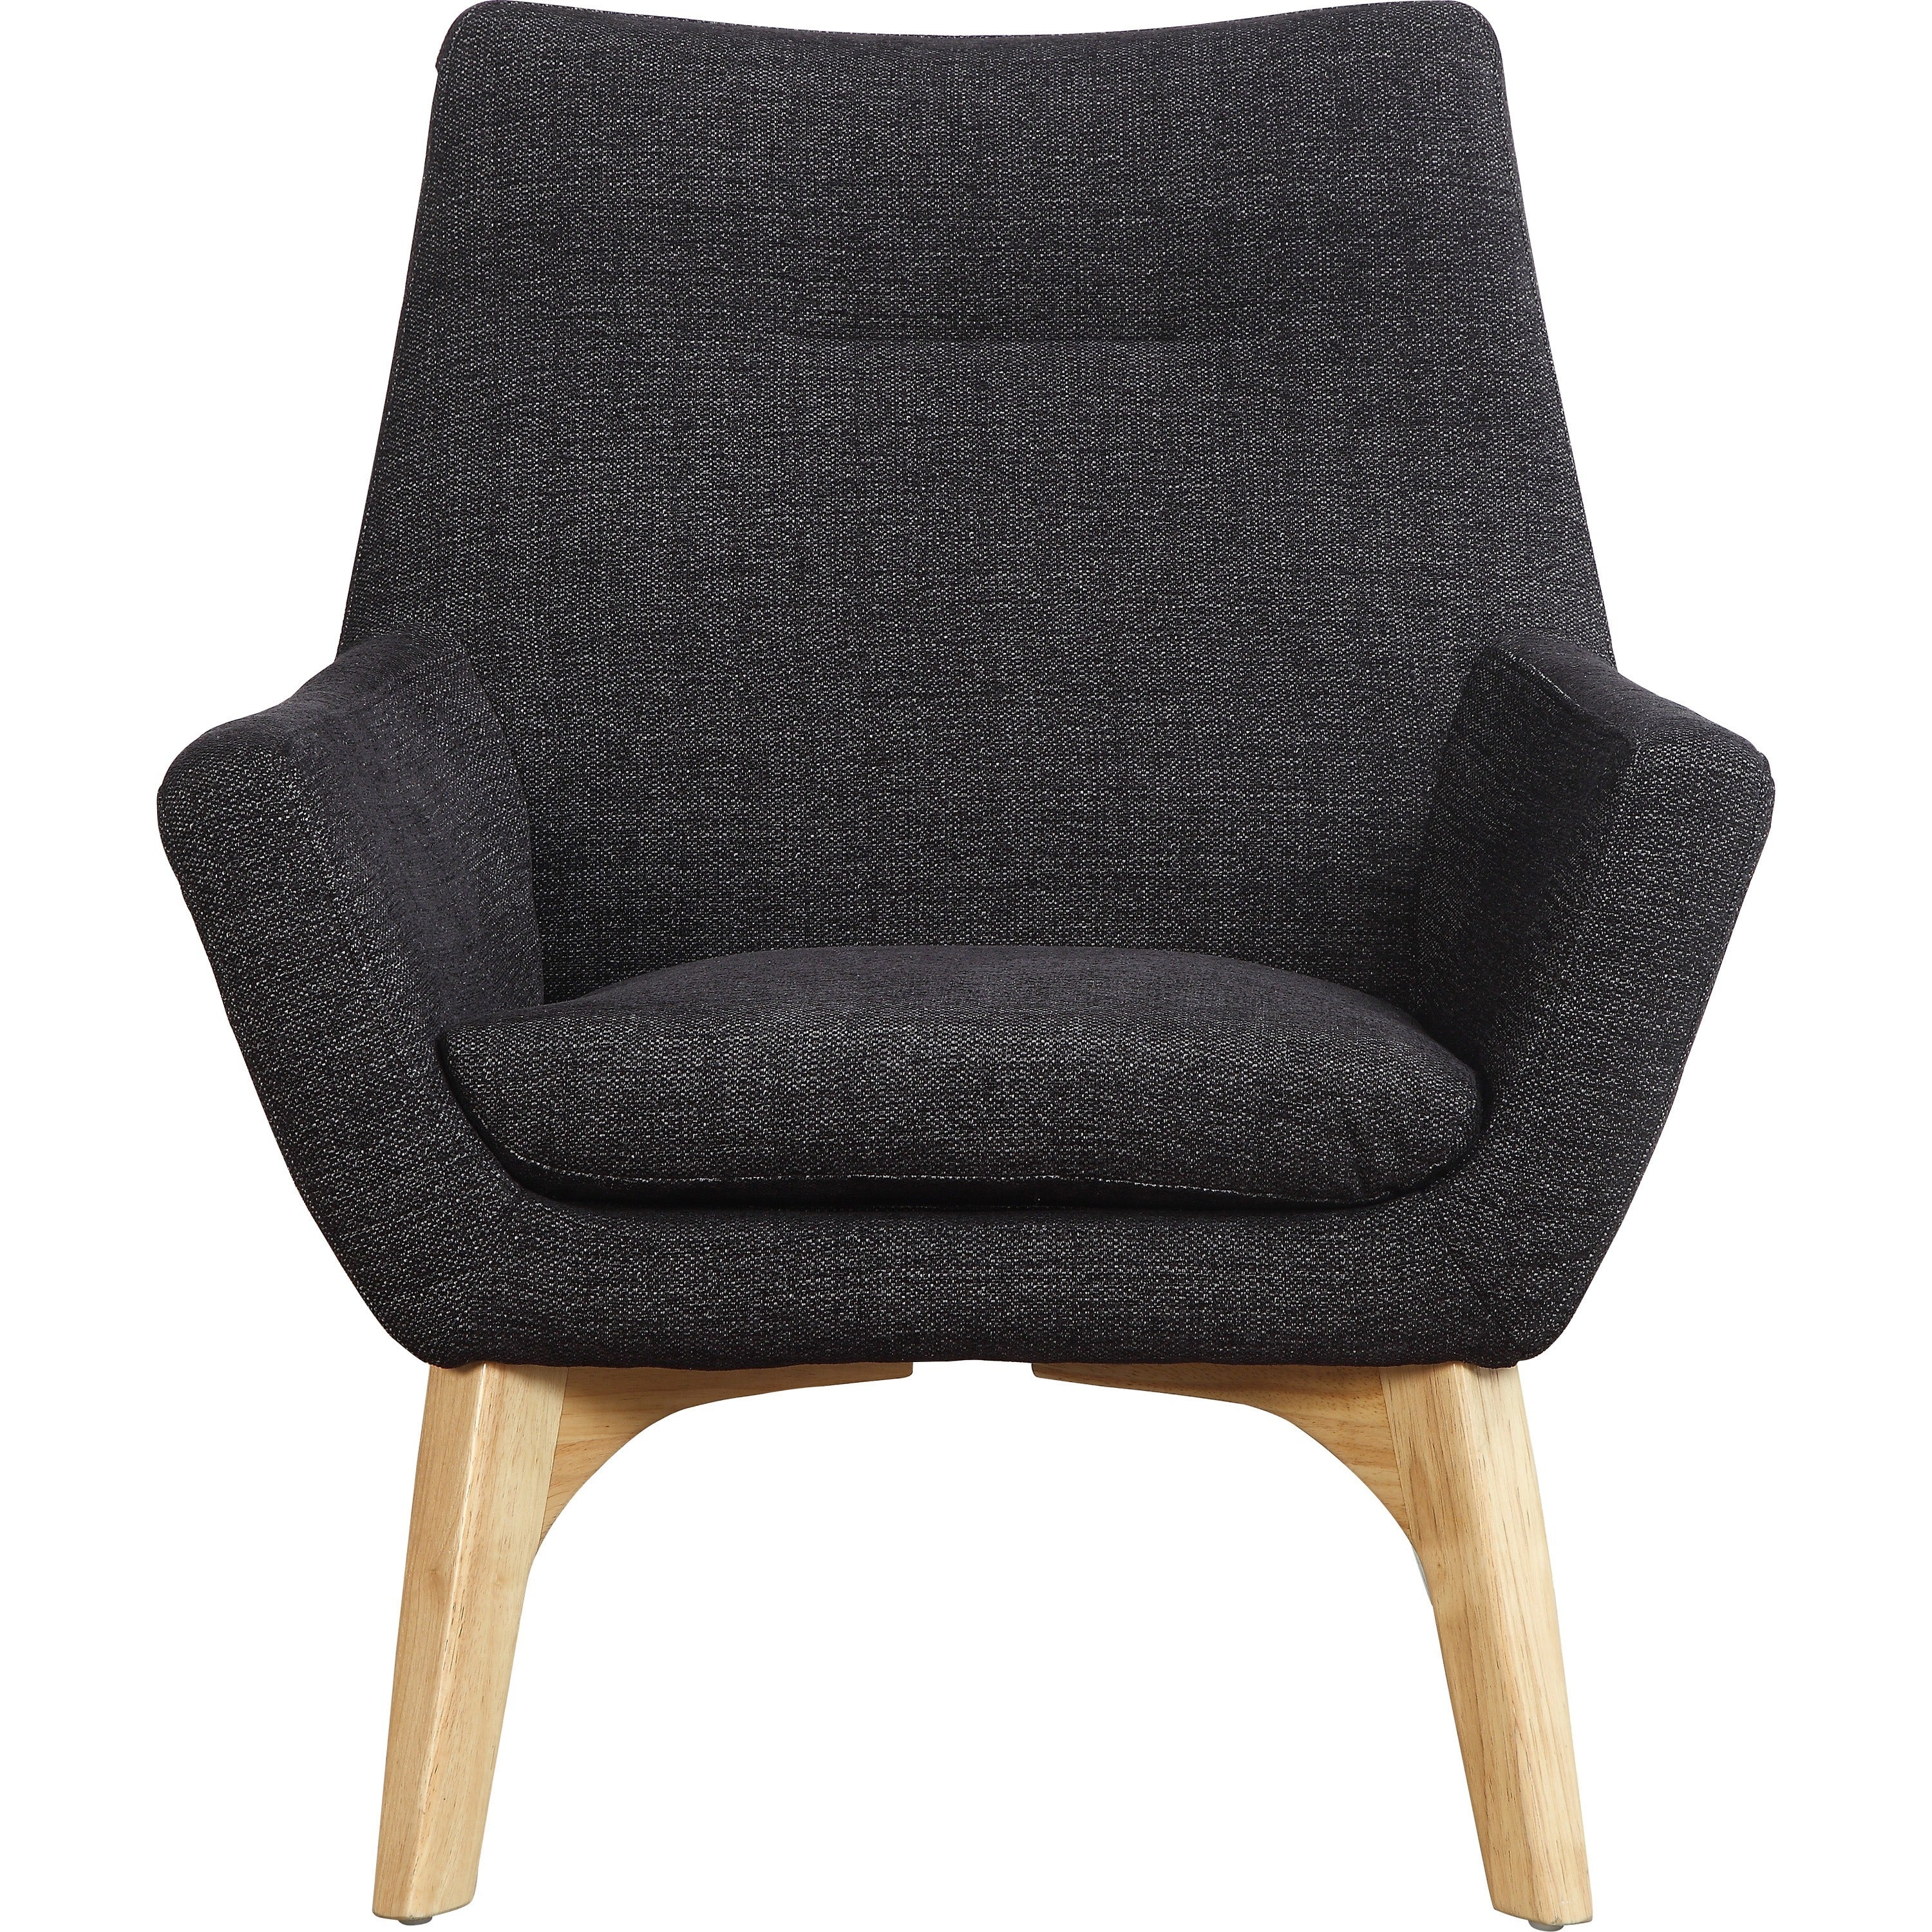 lorell-quintessence-collection-upholstered-chair-black-seat-black-back-low-back-four-legged-base-1-each_llr68958 - 2